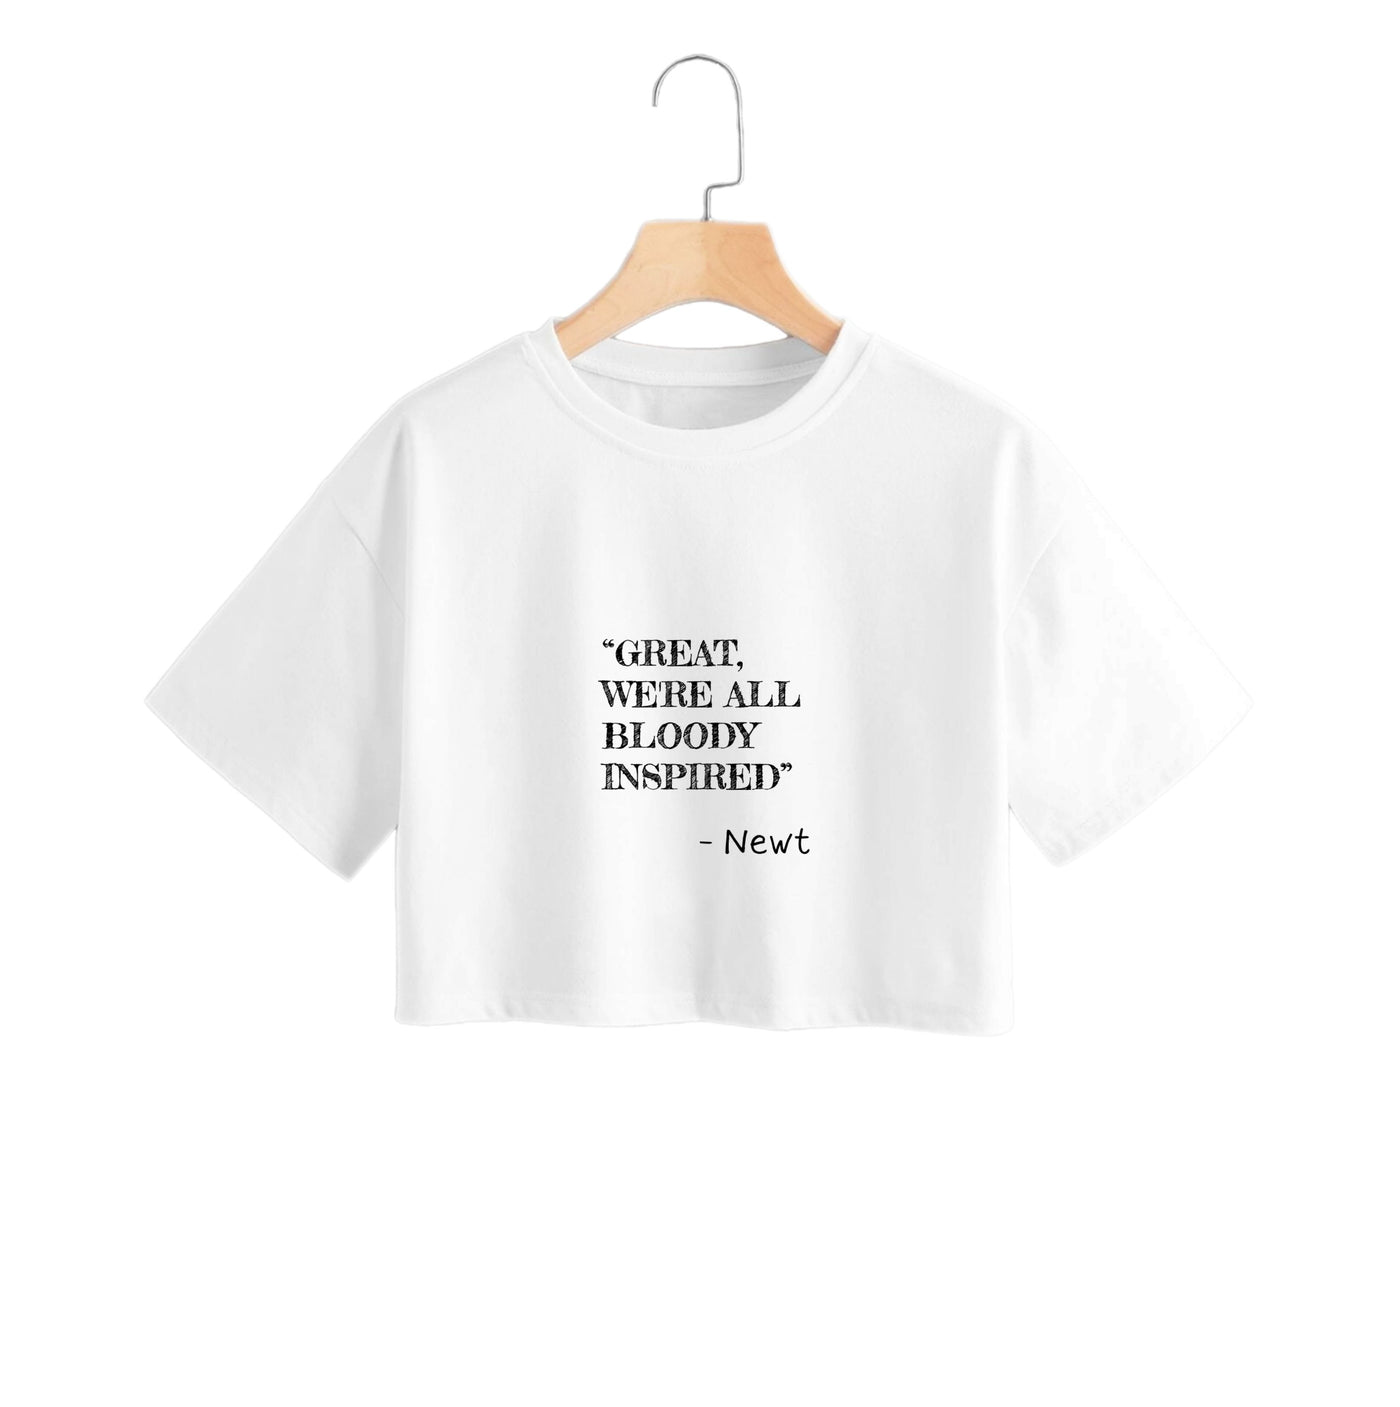 Great, We're All Bloody Inspired - Maze Runner Crop Top